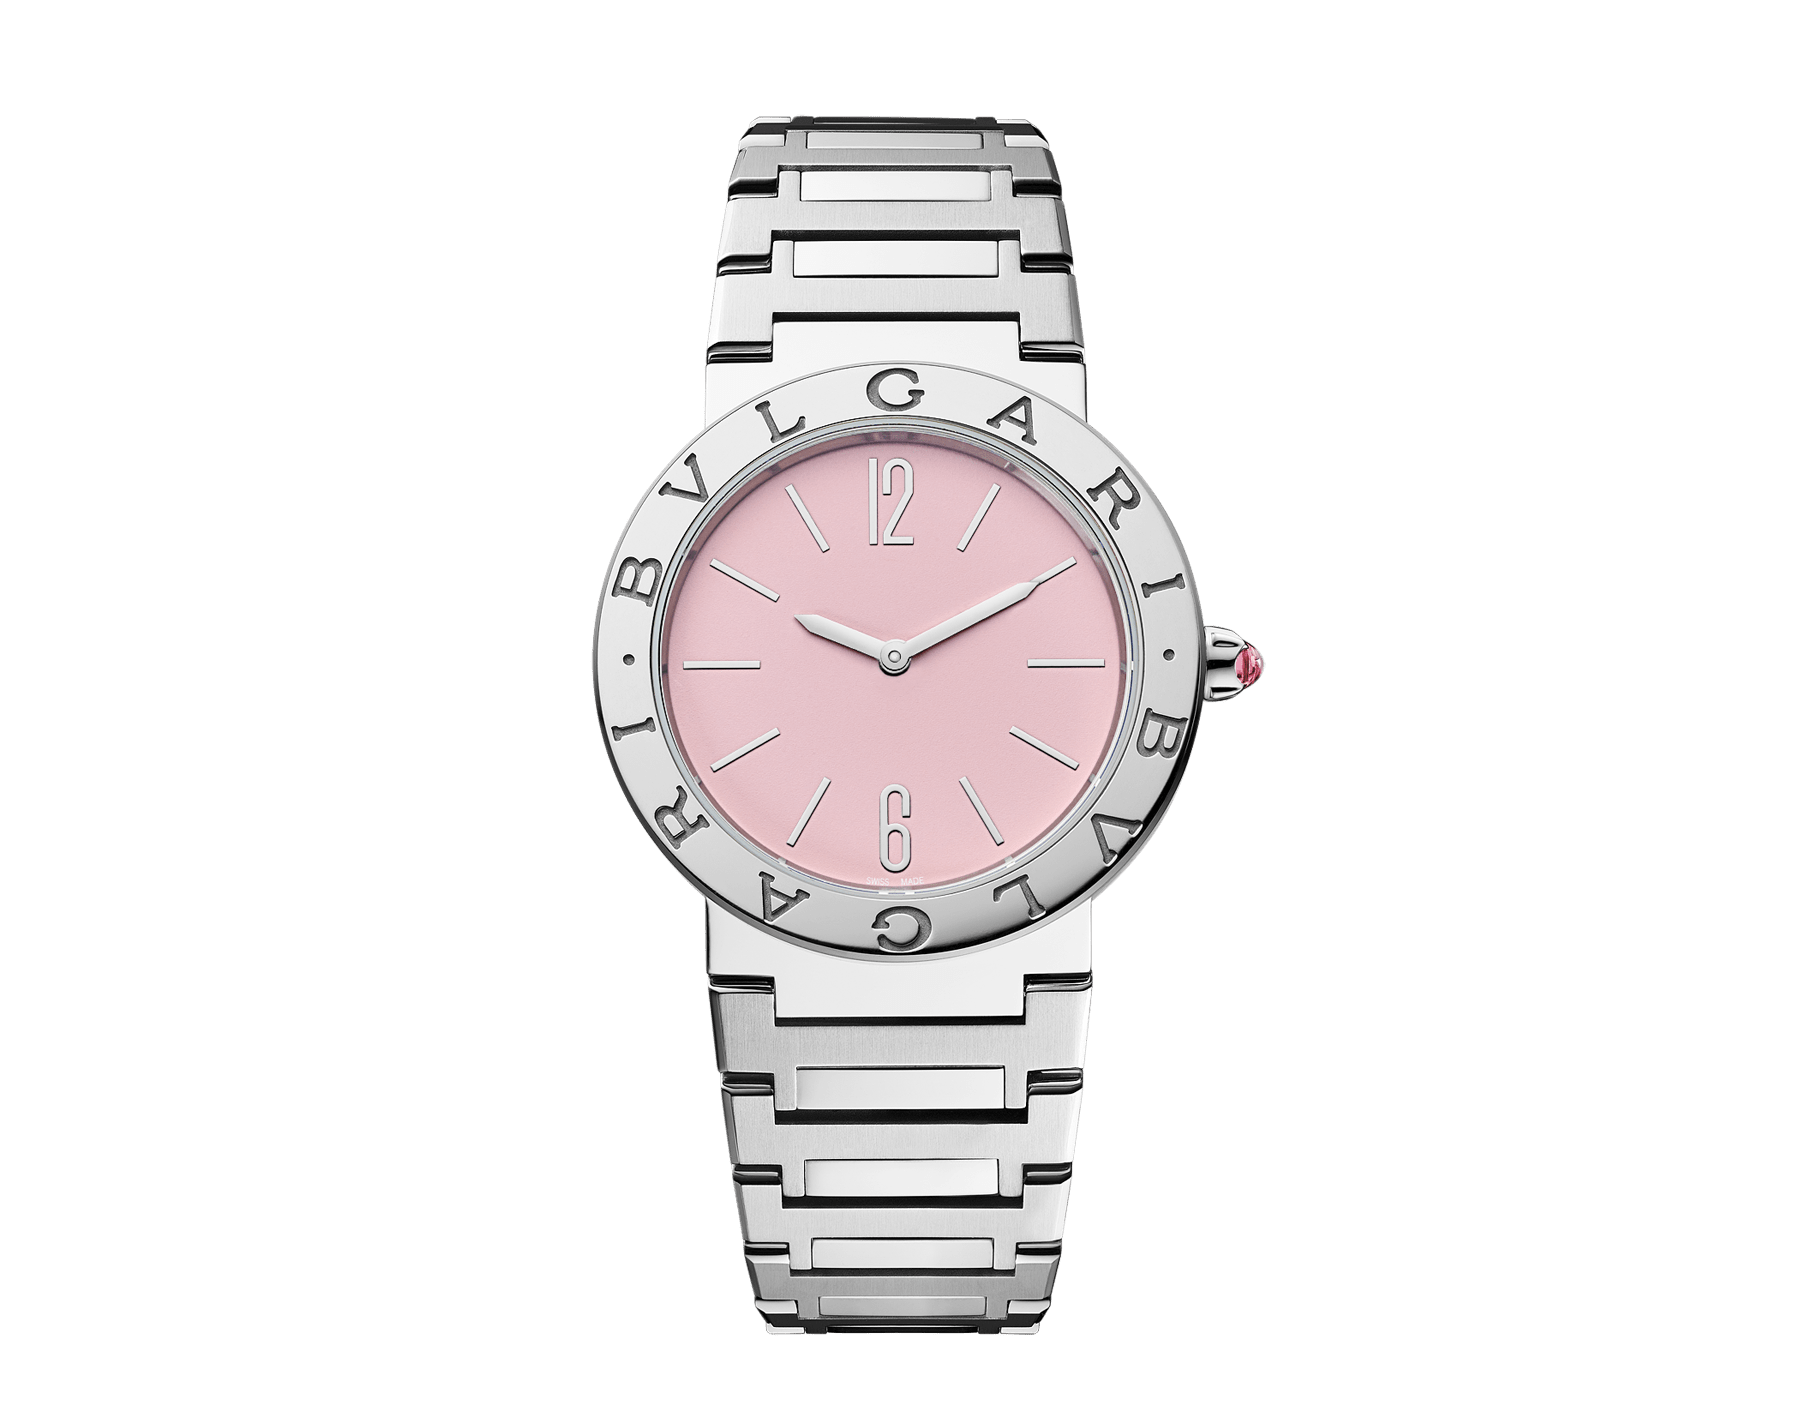 BULGARI BULGARI watch featuring a stainless steel case and bezel engraved with double logo, polished and satin-brushed stainless steel bracelet and pink lacquered dial. Water-resistant up to 30 metres. Limited edition of 350 pieces. 103711 image 1